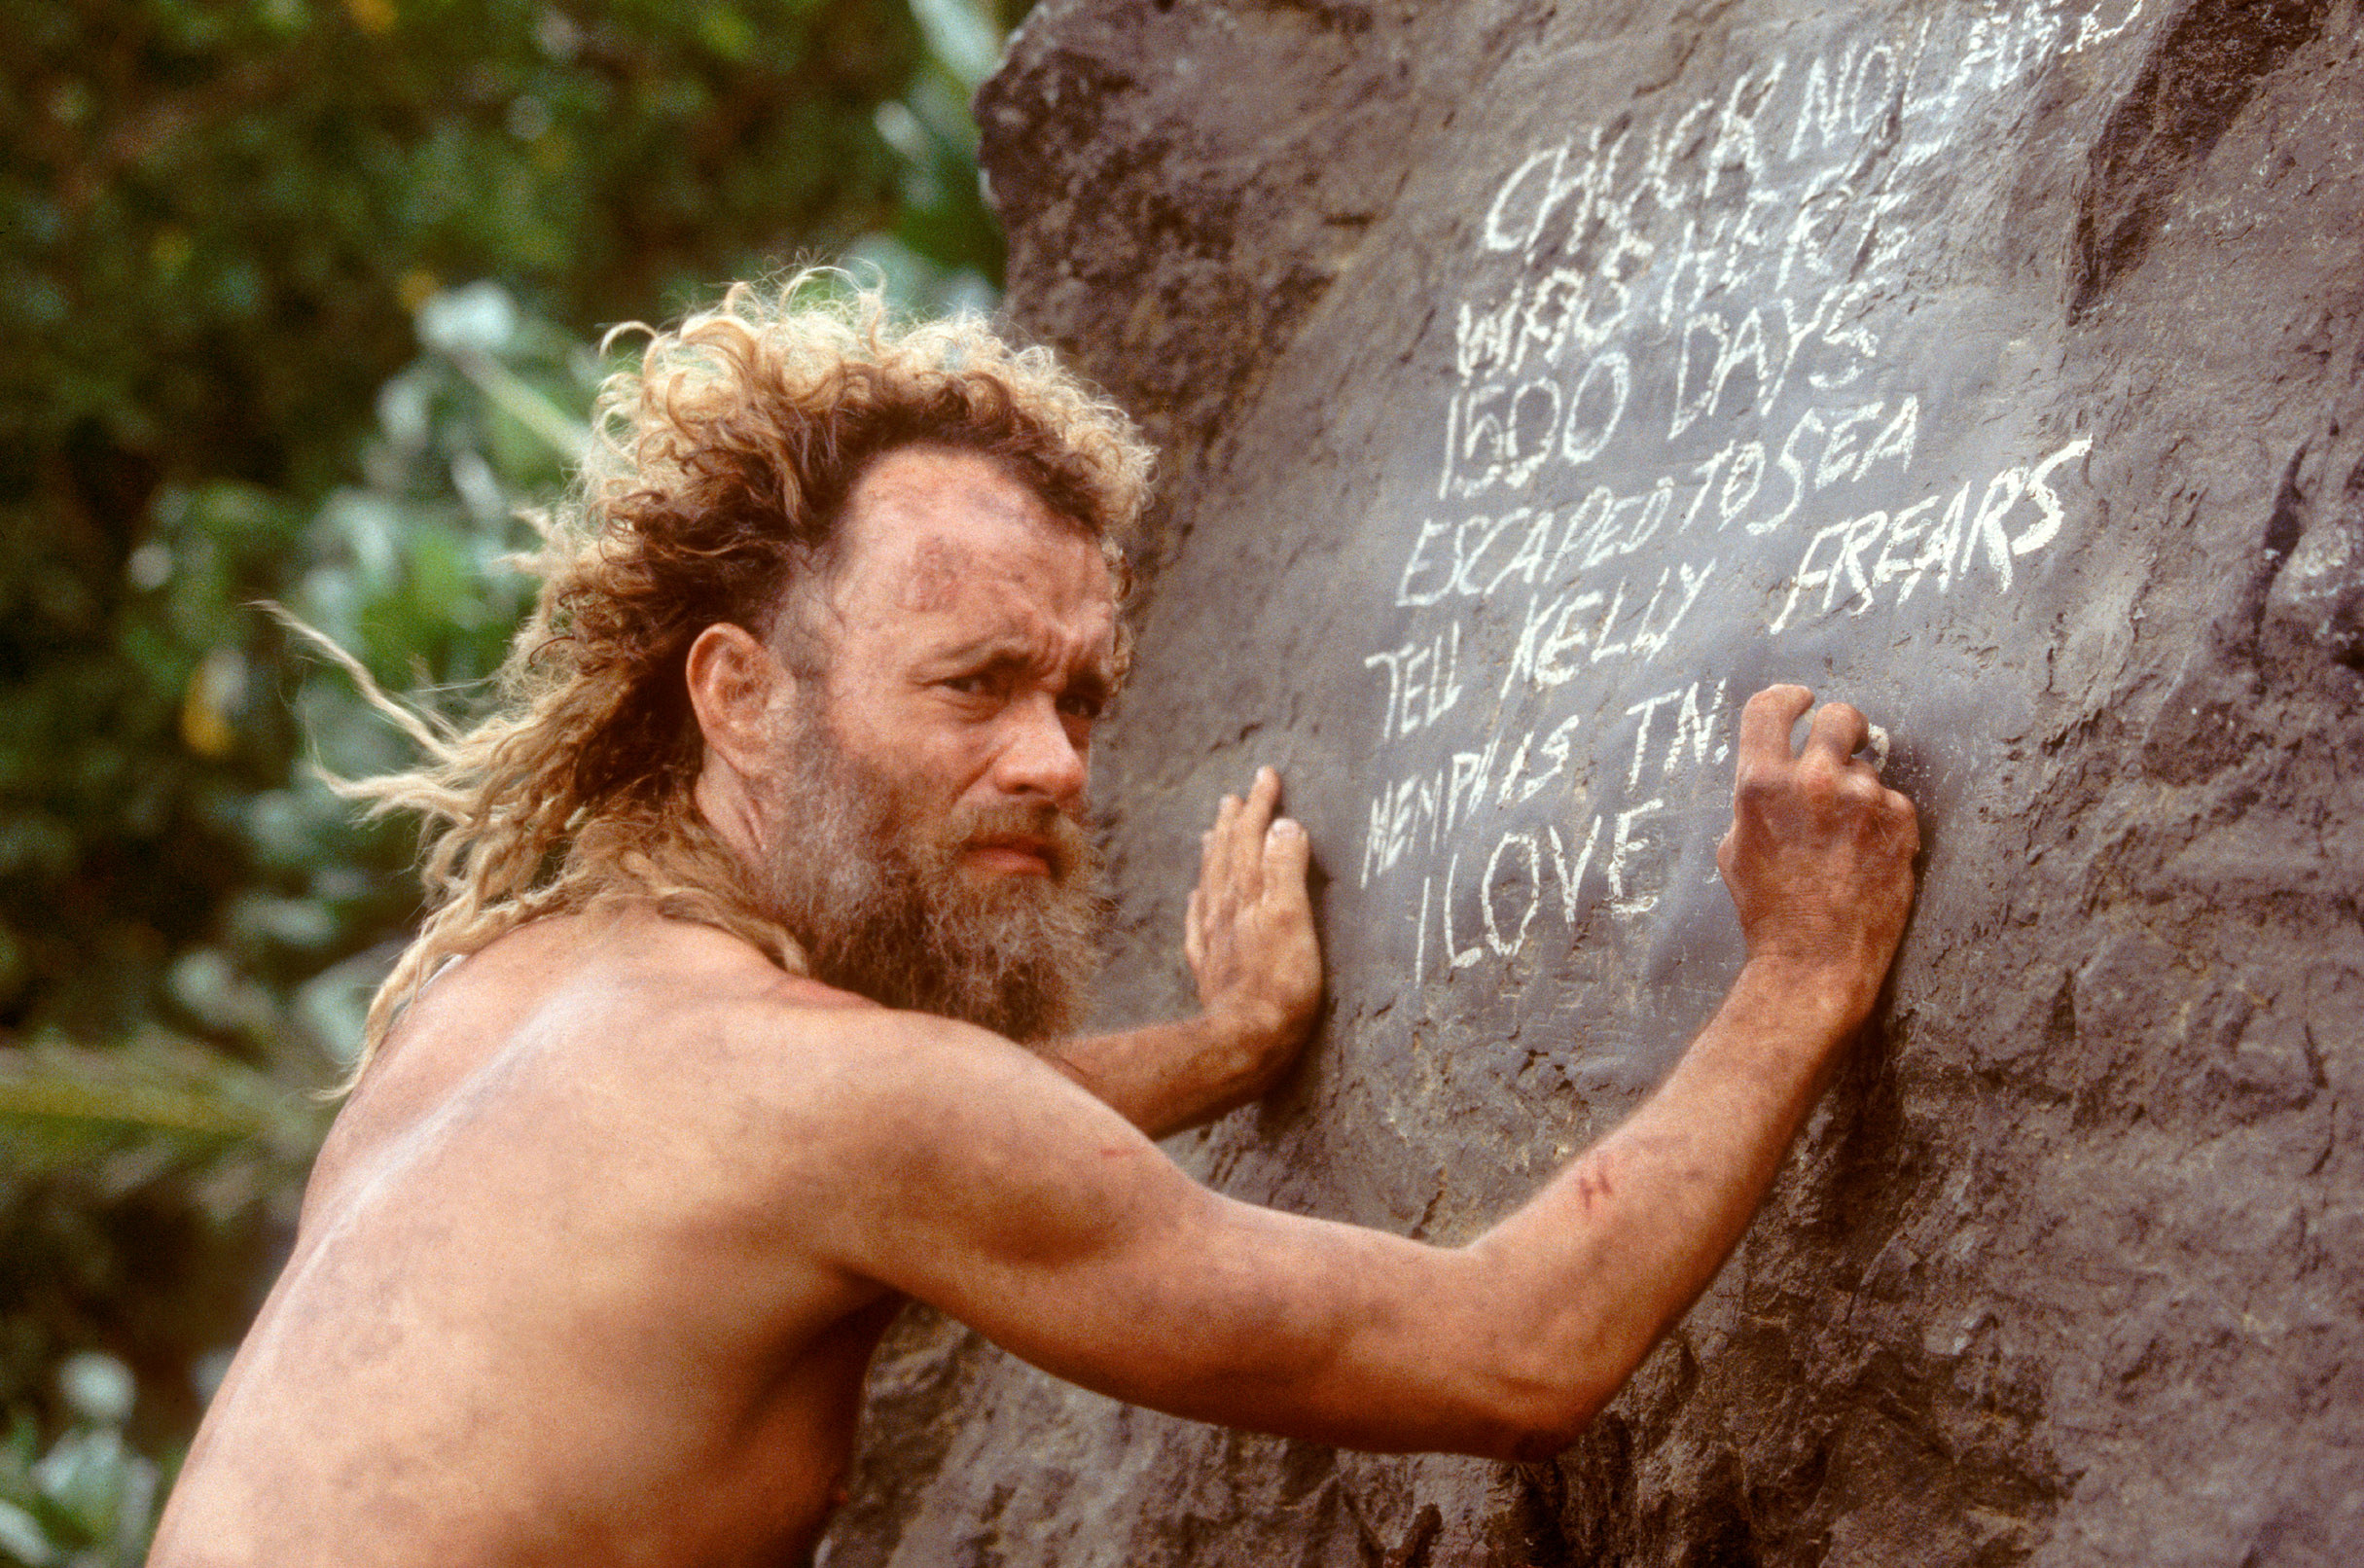 Tom Hanks writes a message on a rock face for future rescuers before he attempts to finally leave the island on a raft